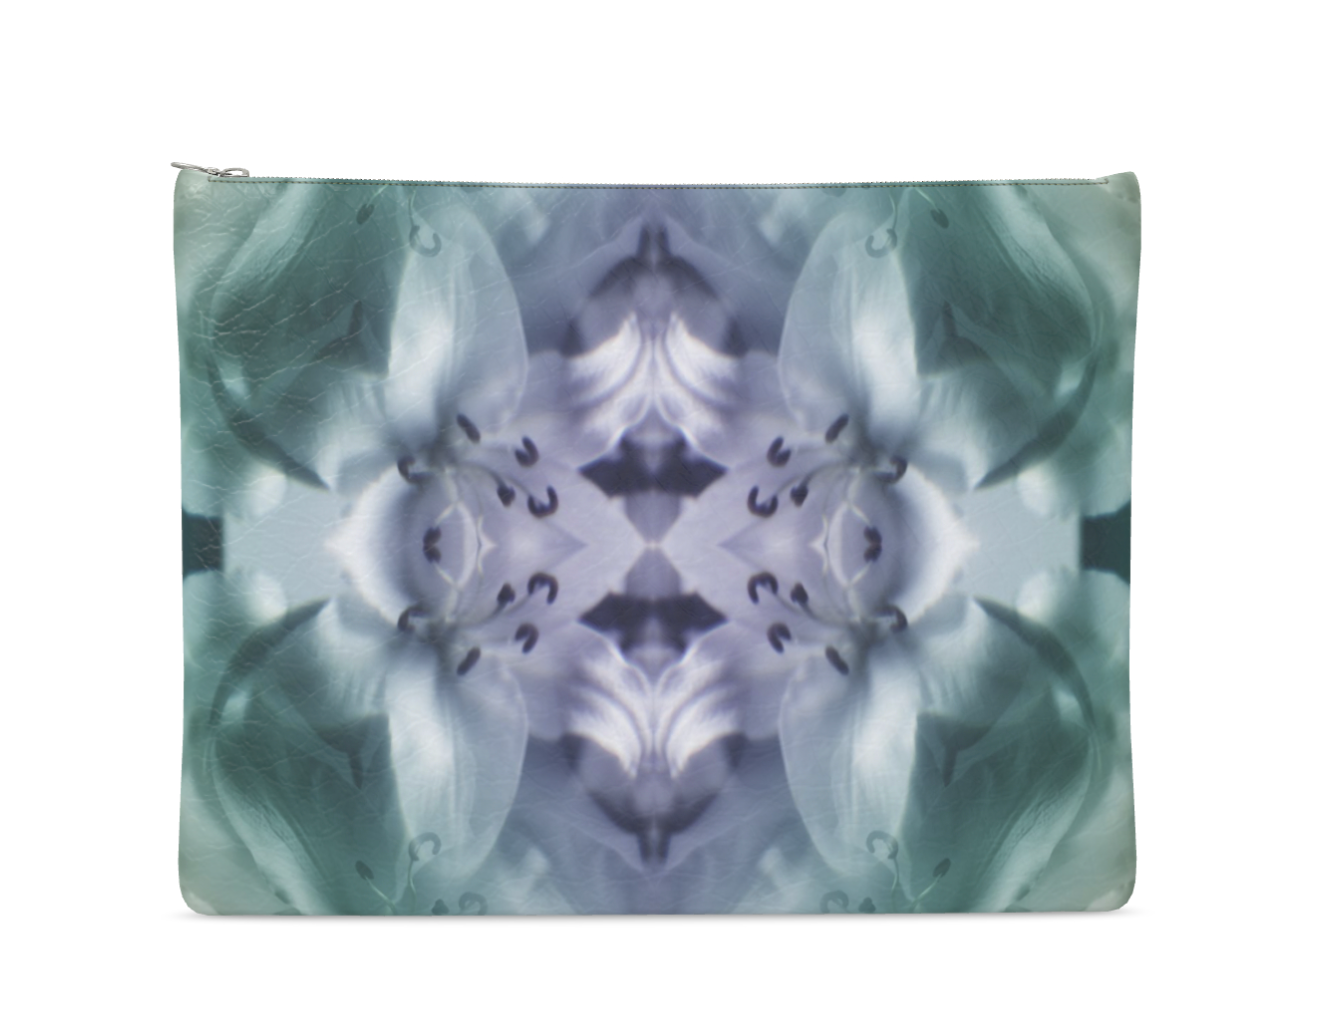 UNTITLED x Indira Cesarine "Cascade of Lilies" Kaleidoscopic Leather Clutch Bag - Limited Edition